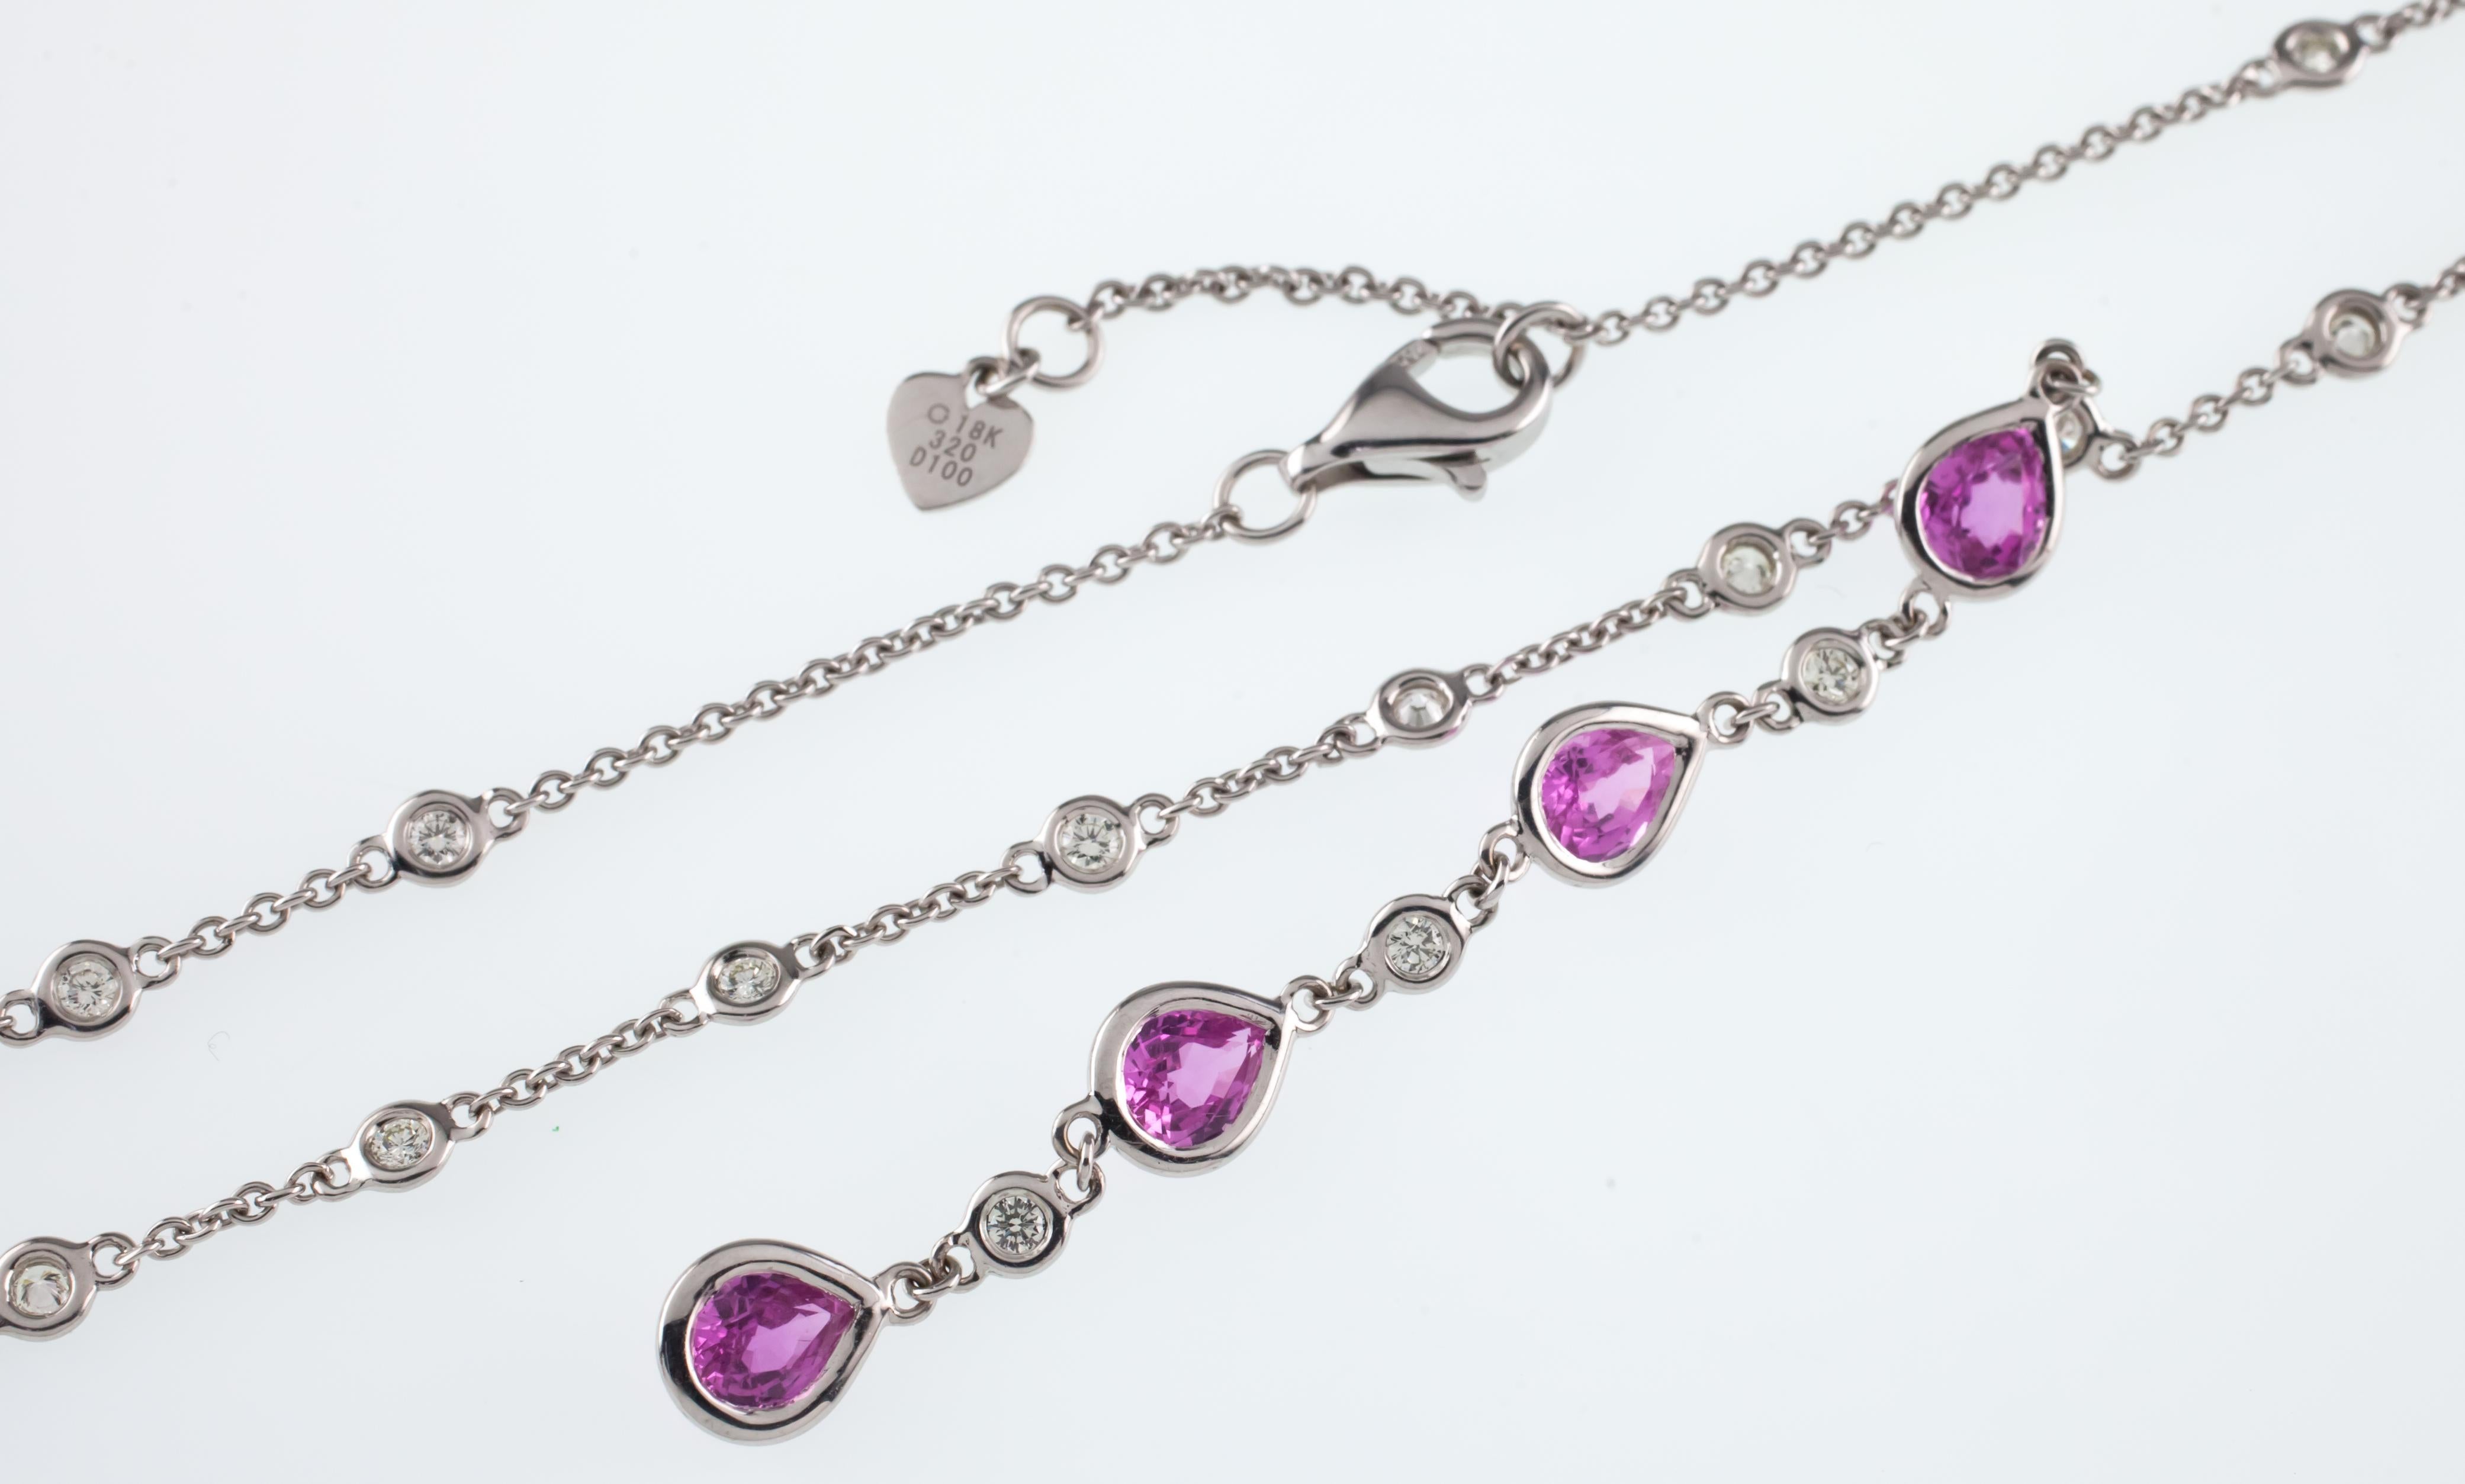 Pear Cut 4.2 Carat Diamond and Pink Sapphire White Gold Necklace with Drop Pendant